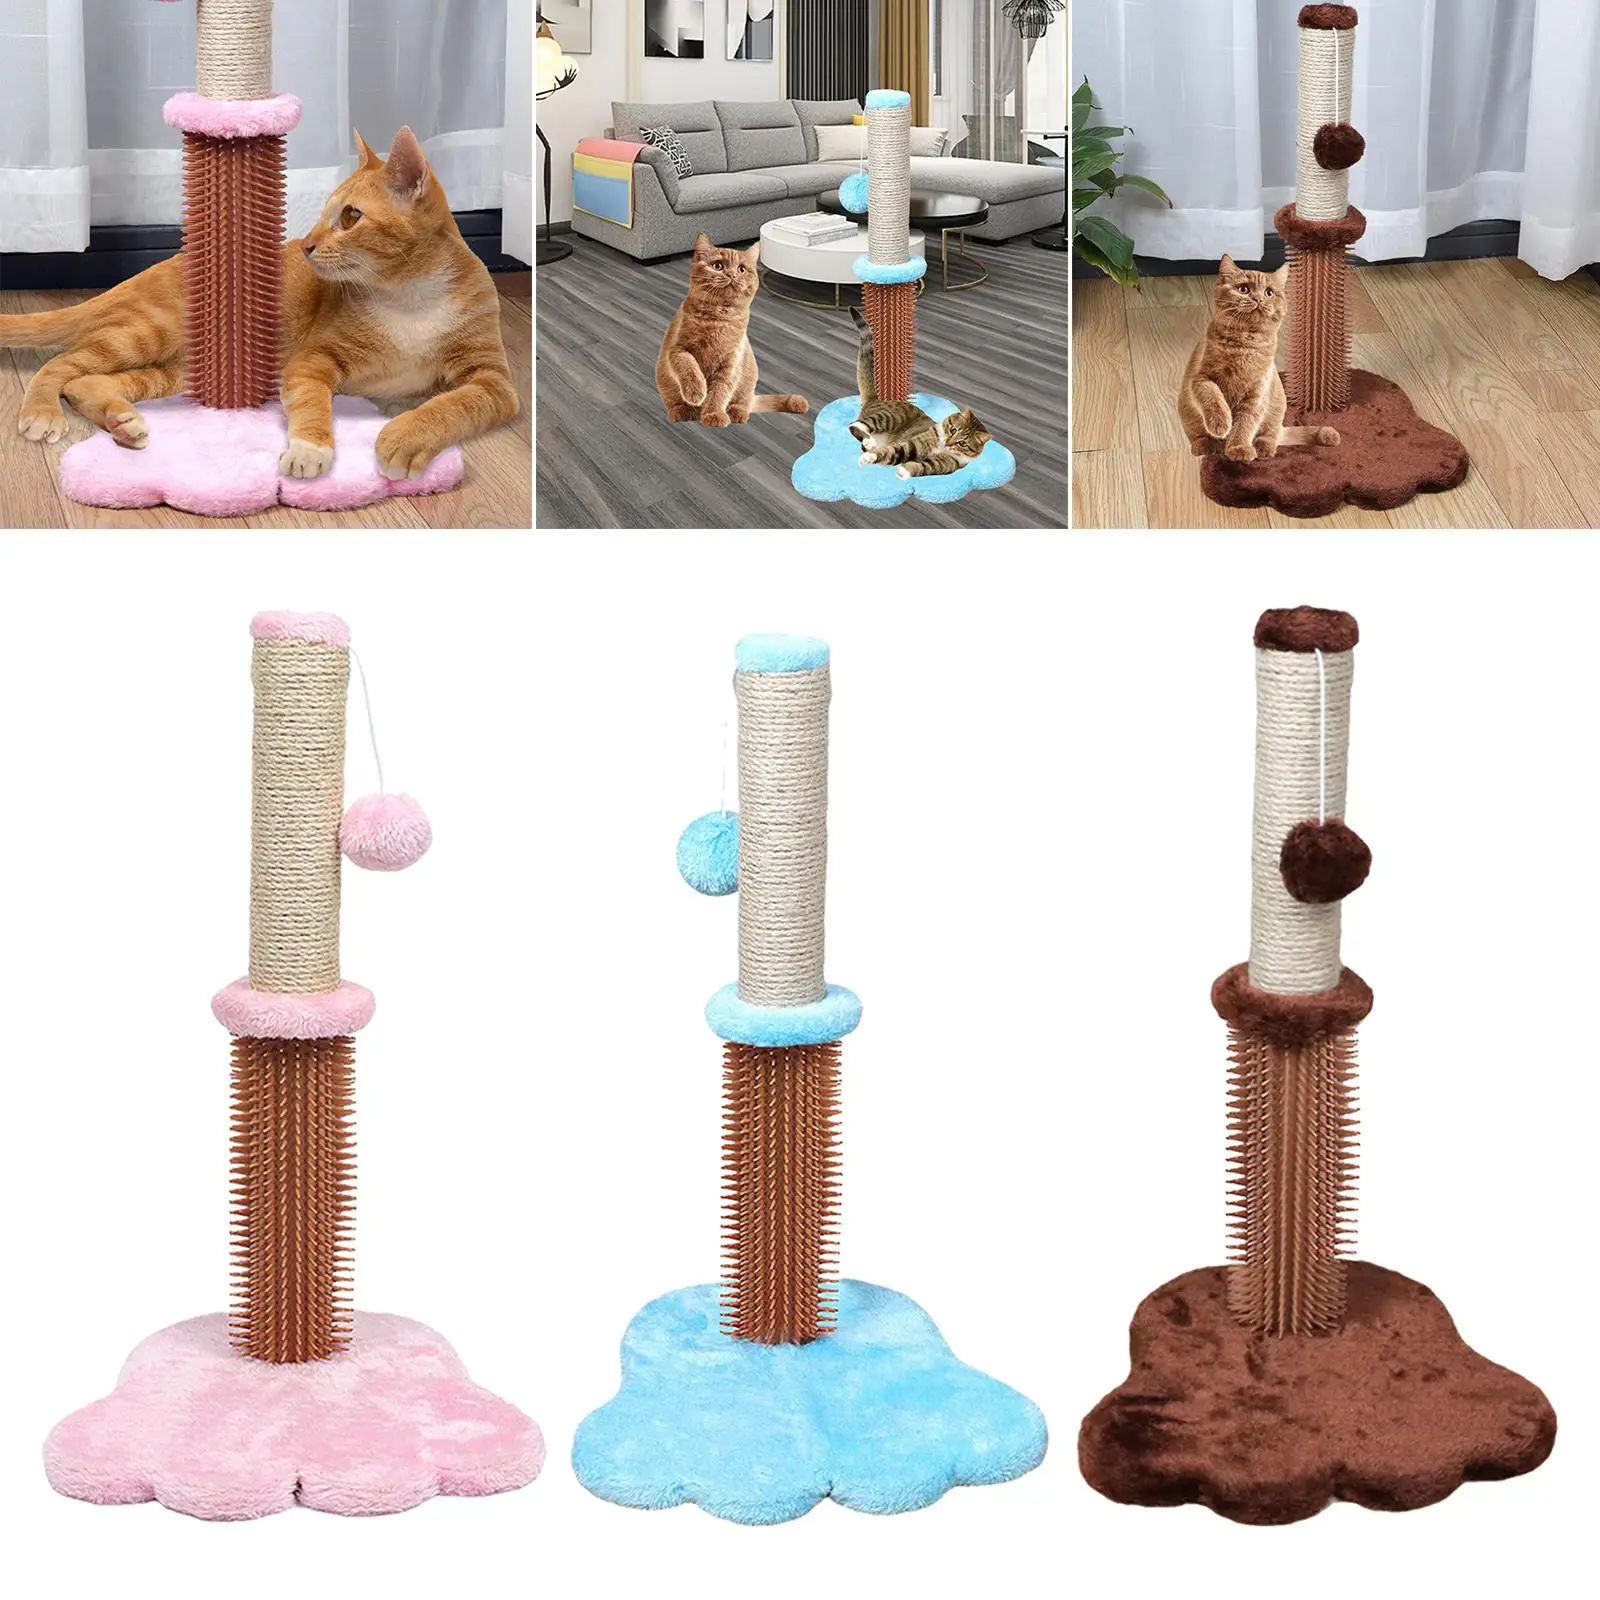 Stable Round Bottom ing Pole, Climbing Shelf Tree with post for scratching, Durable Sisal Interactive Toy